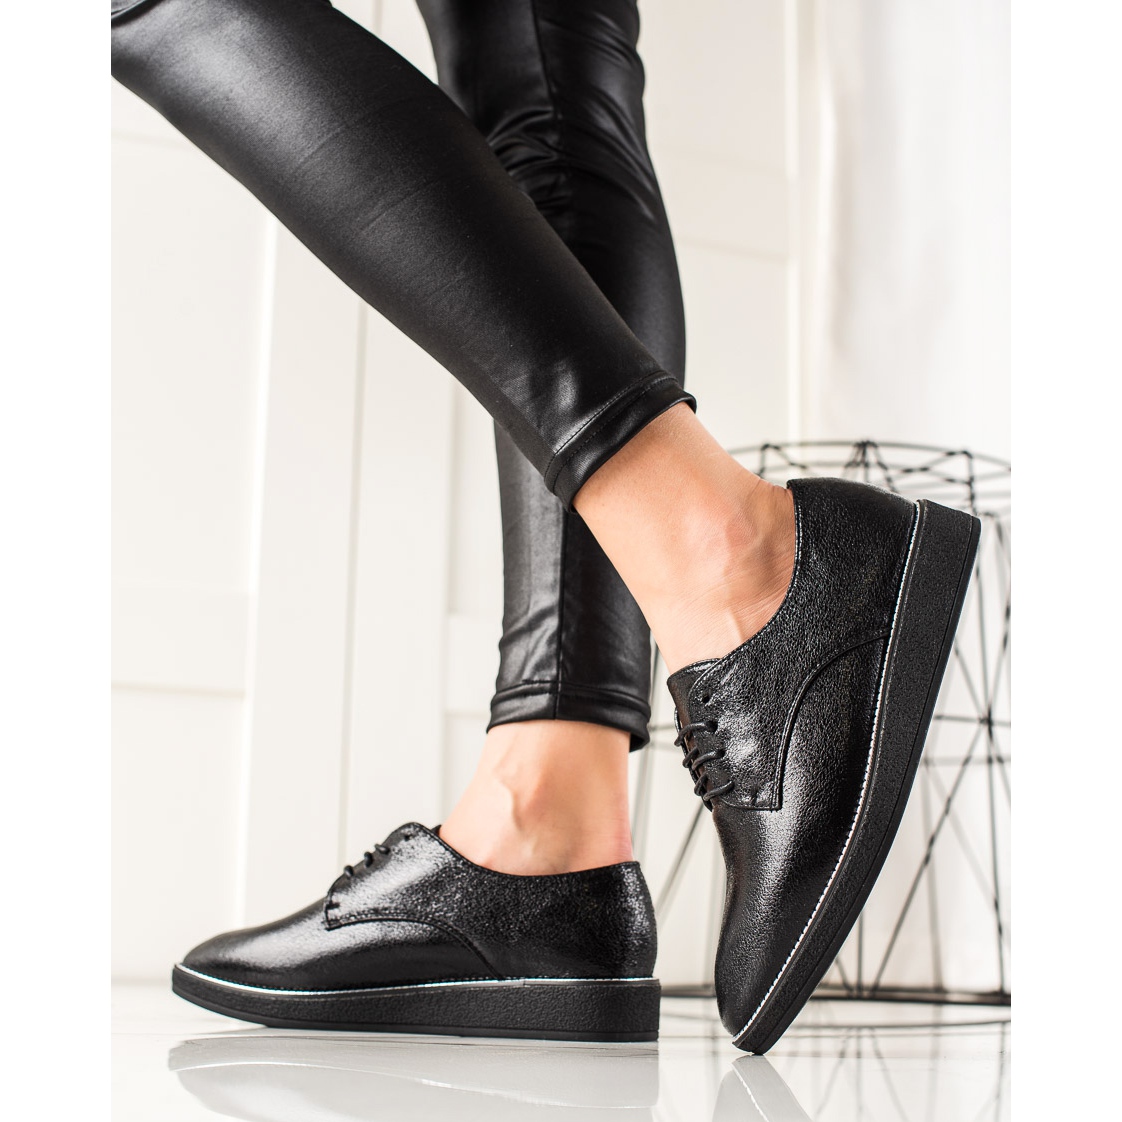 Classic Shiny Blackleather Lace up shoes